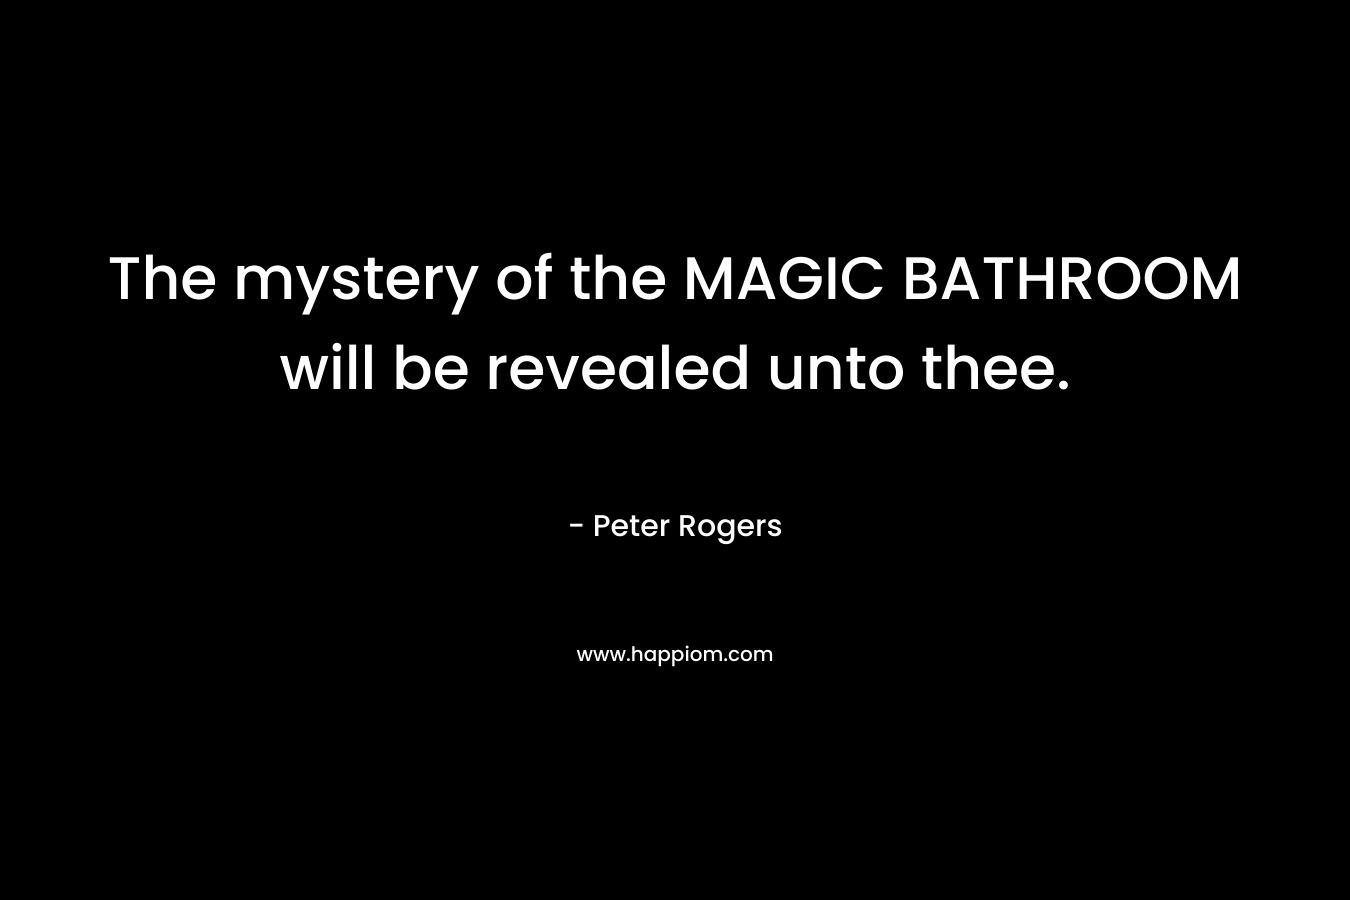 The mystery of the MAGIC BATHROOM will be revealed unto thee.